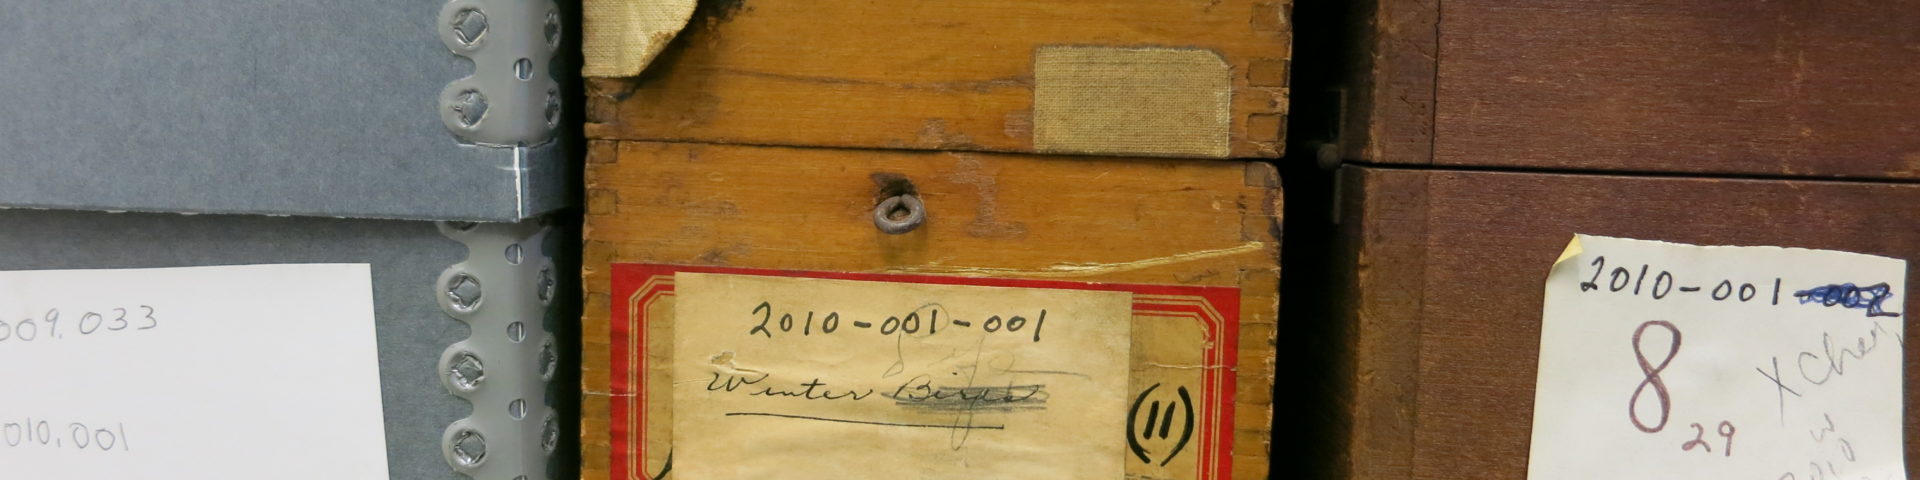 document boxes in archives